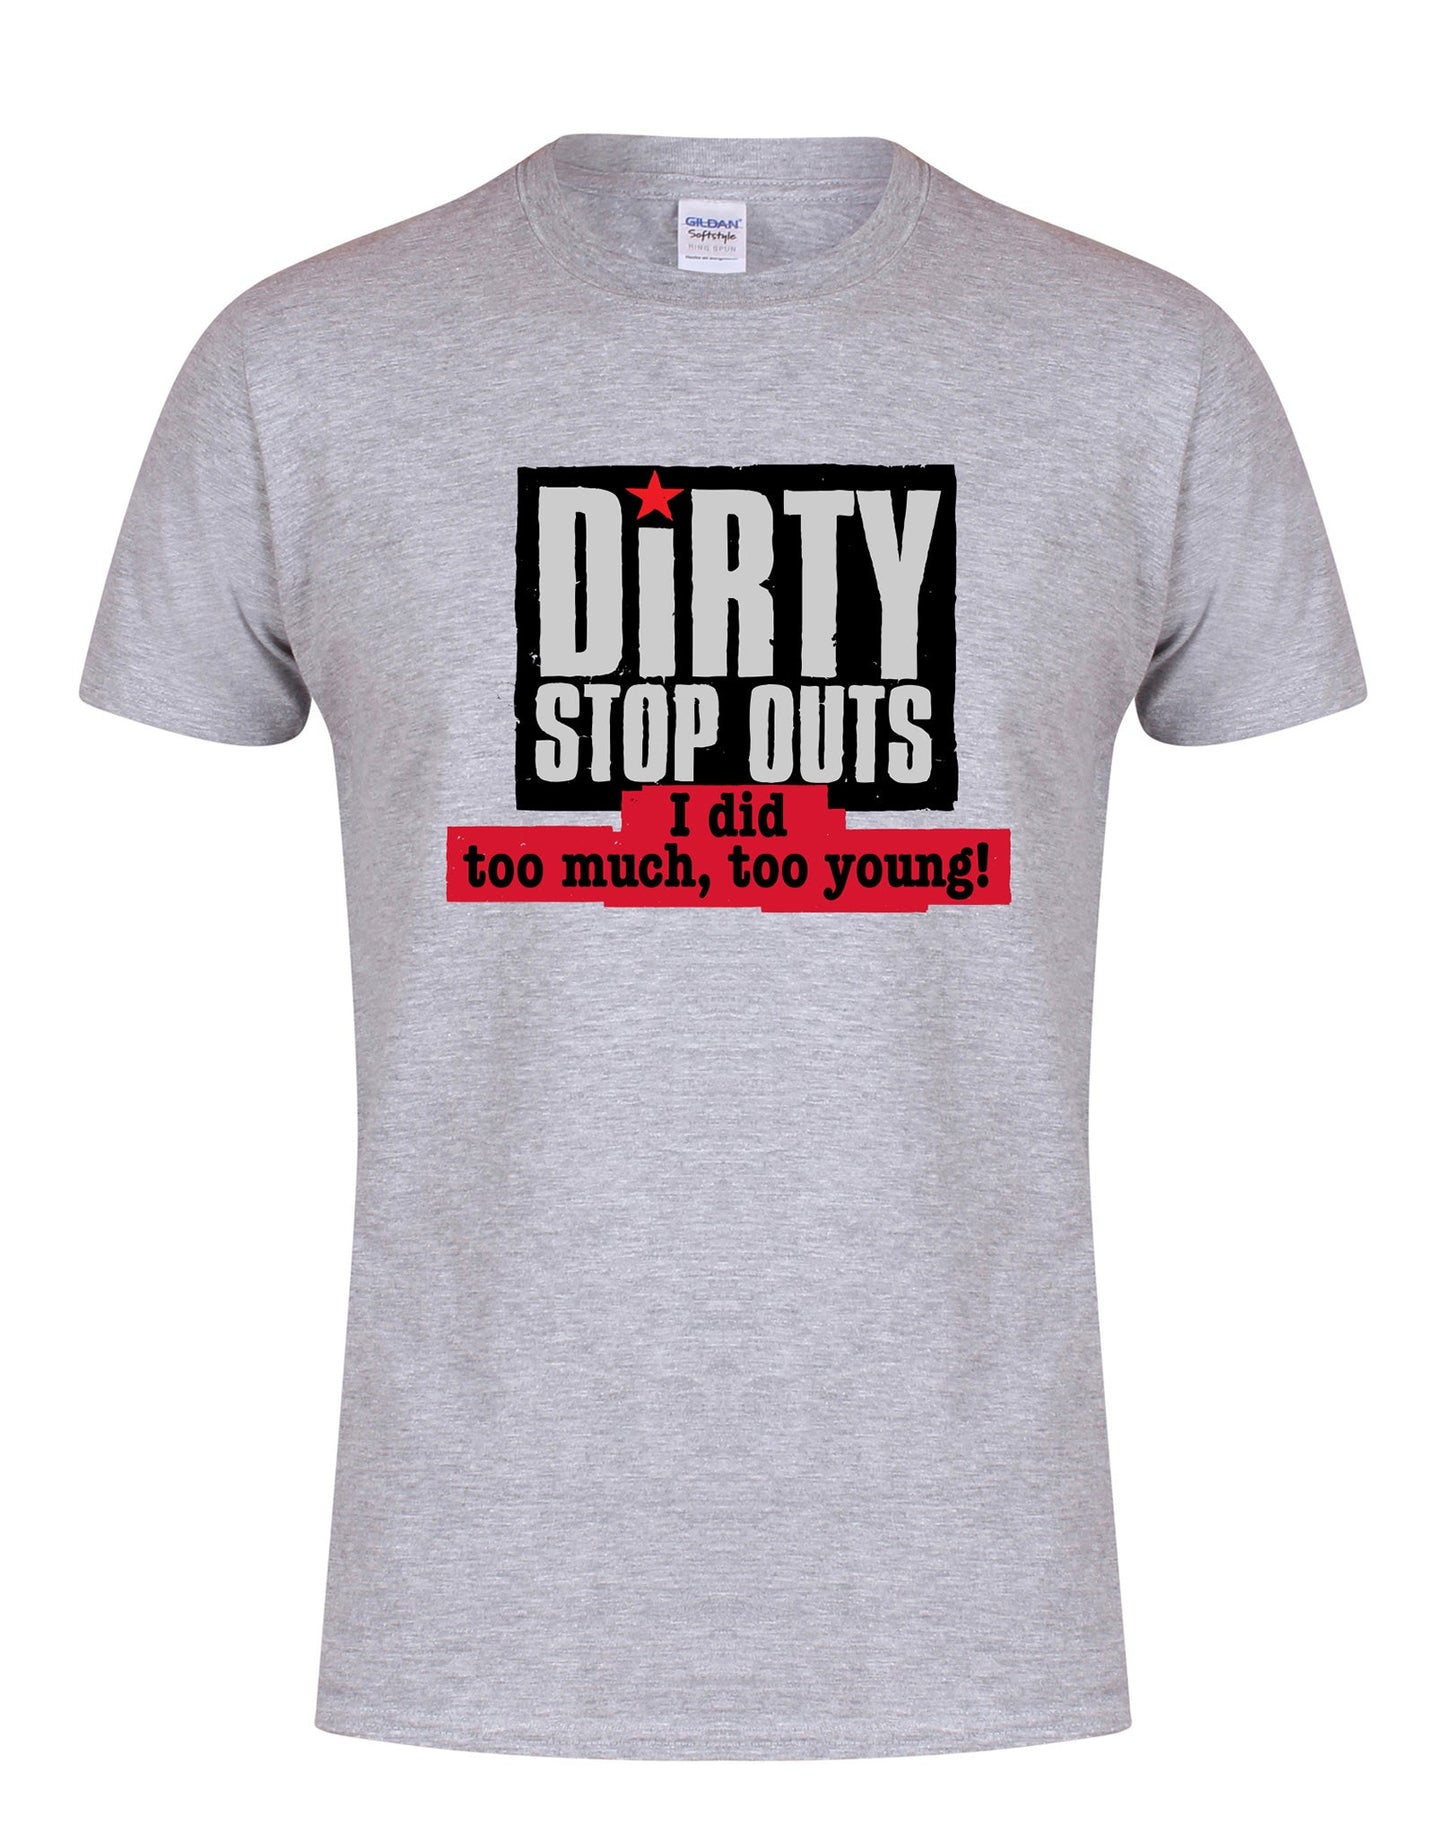 "I did too much, too young!" unisex fit T-shirt - various colours - Dirty Stop Outs